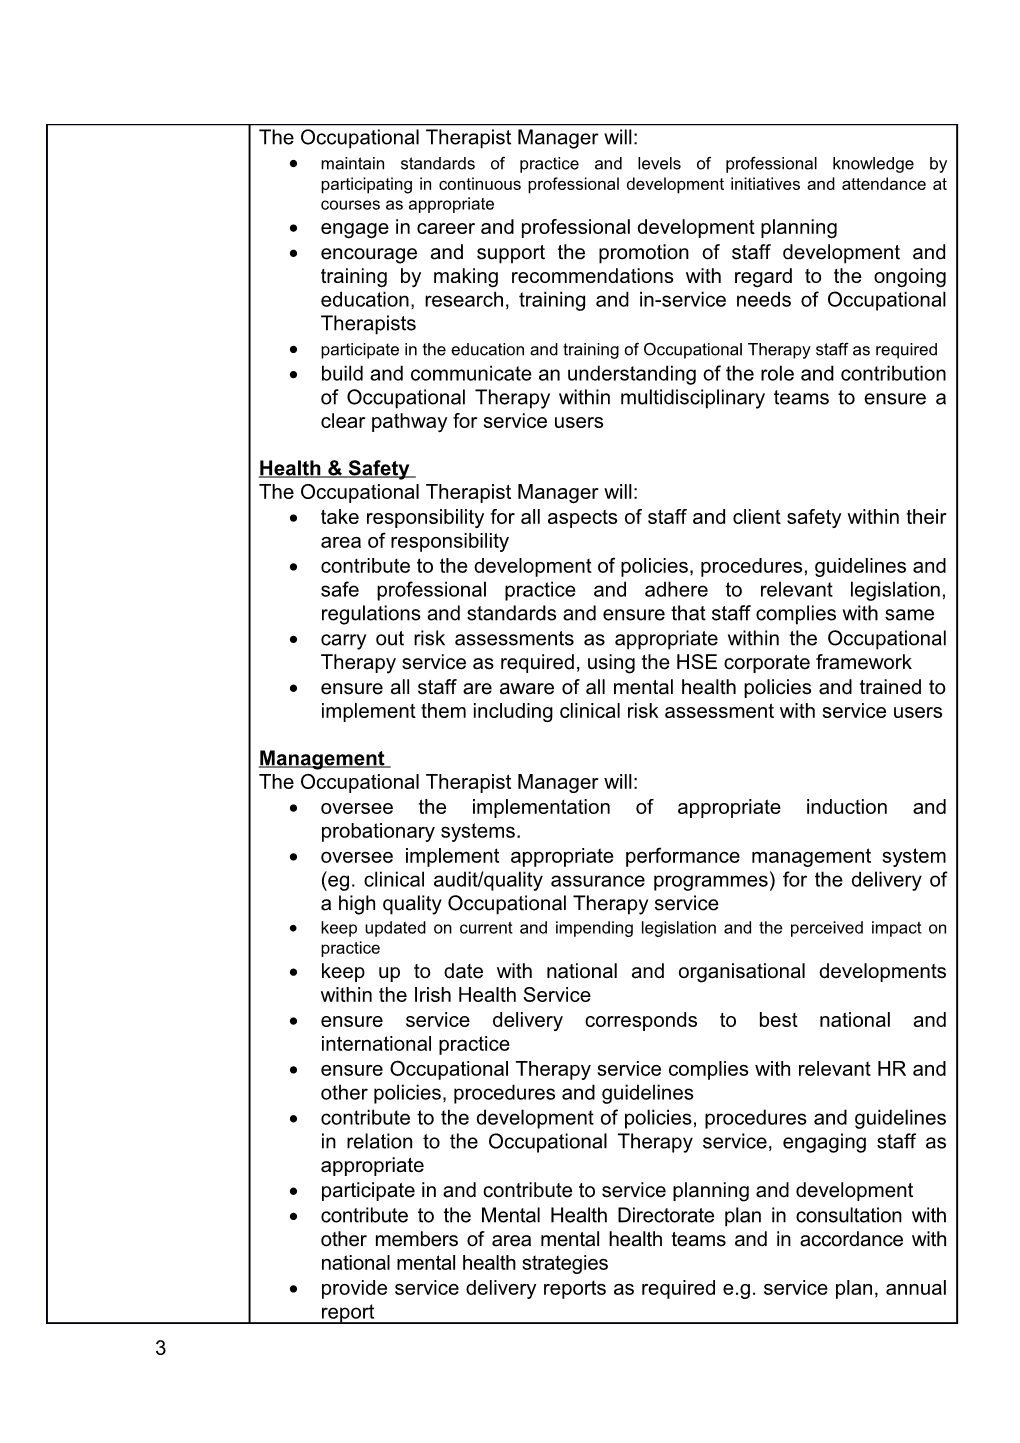 Job Specification & Terms and Conditions s8